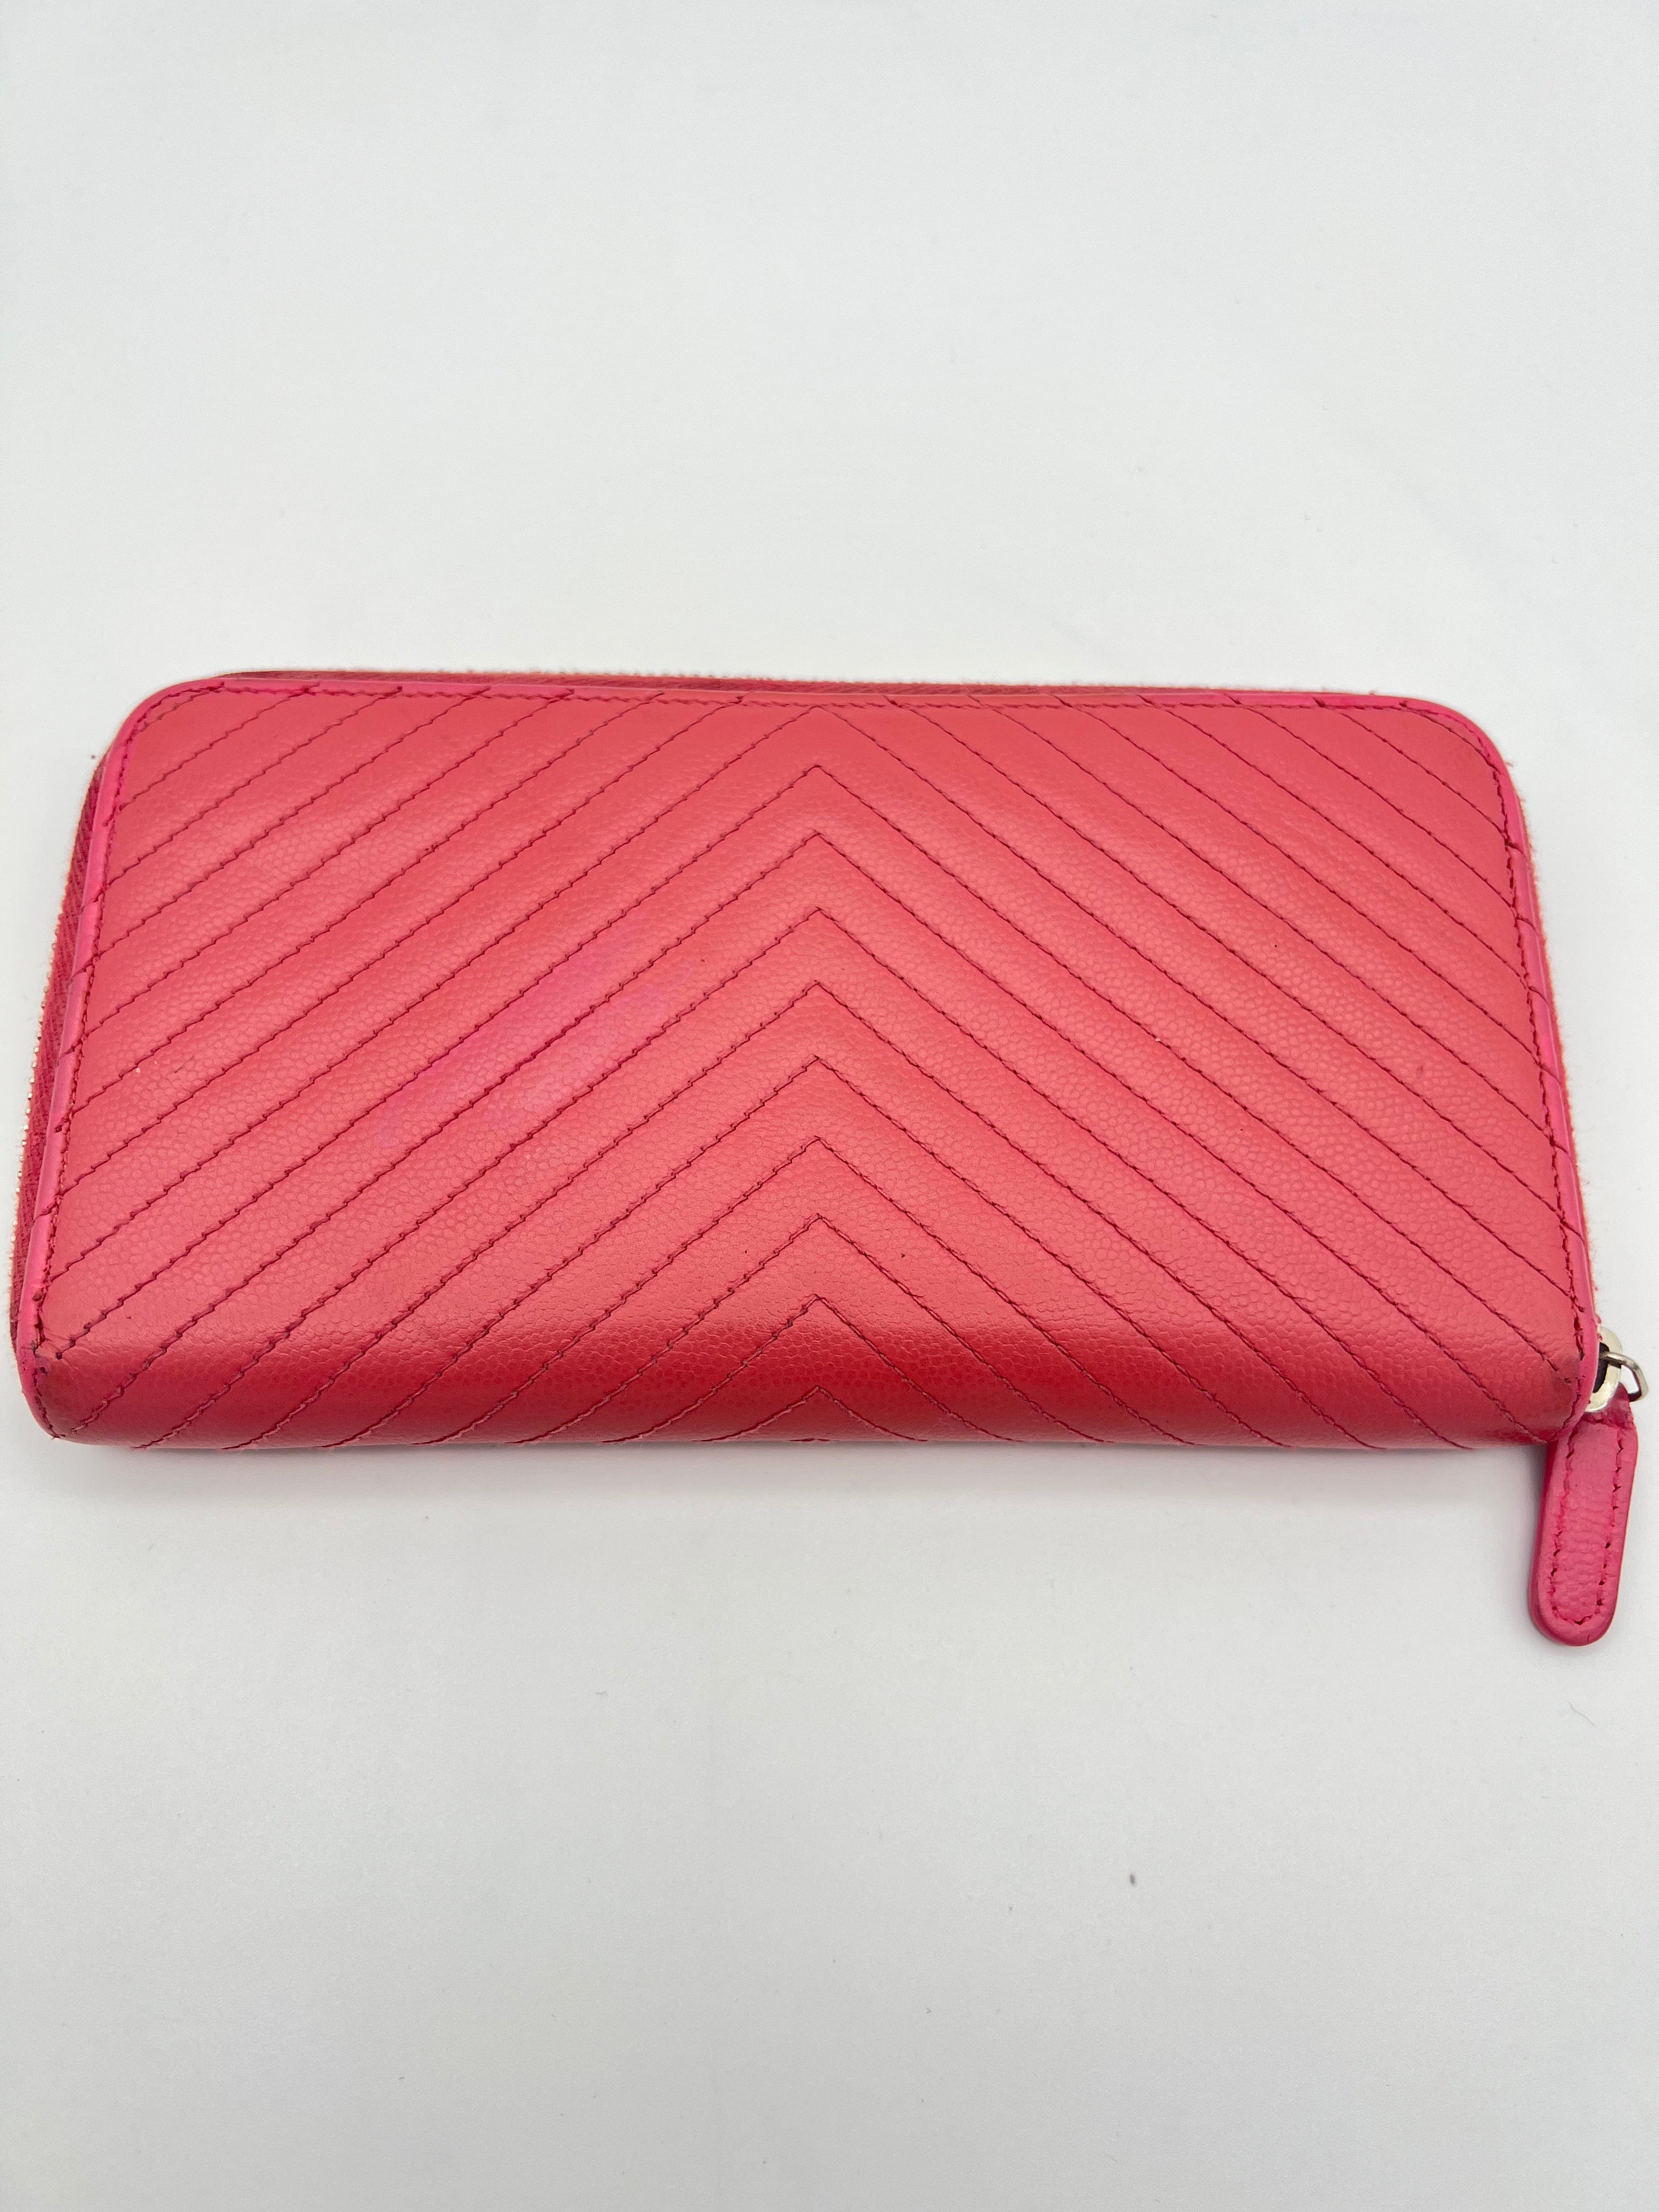 Chanel Pink Chanel Wallet UIC1105